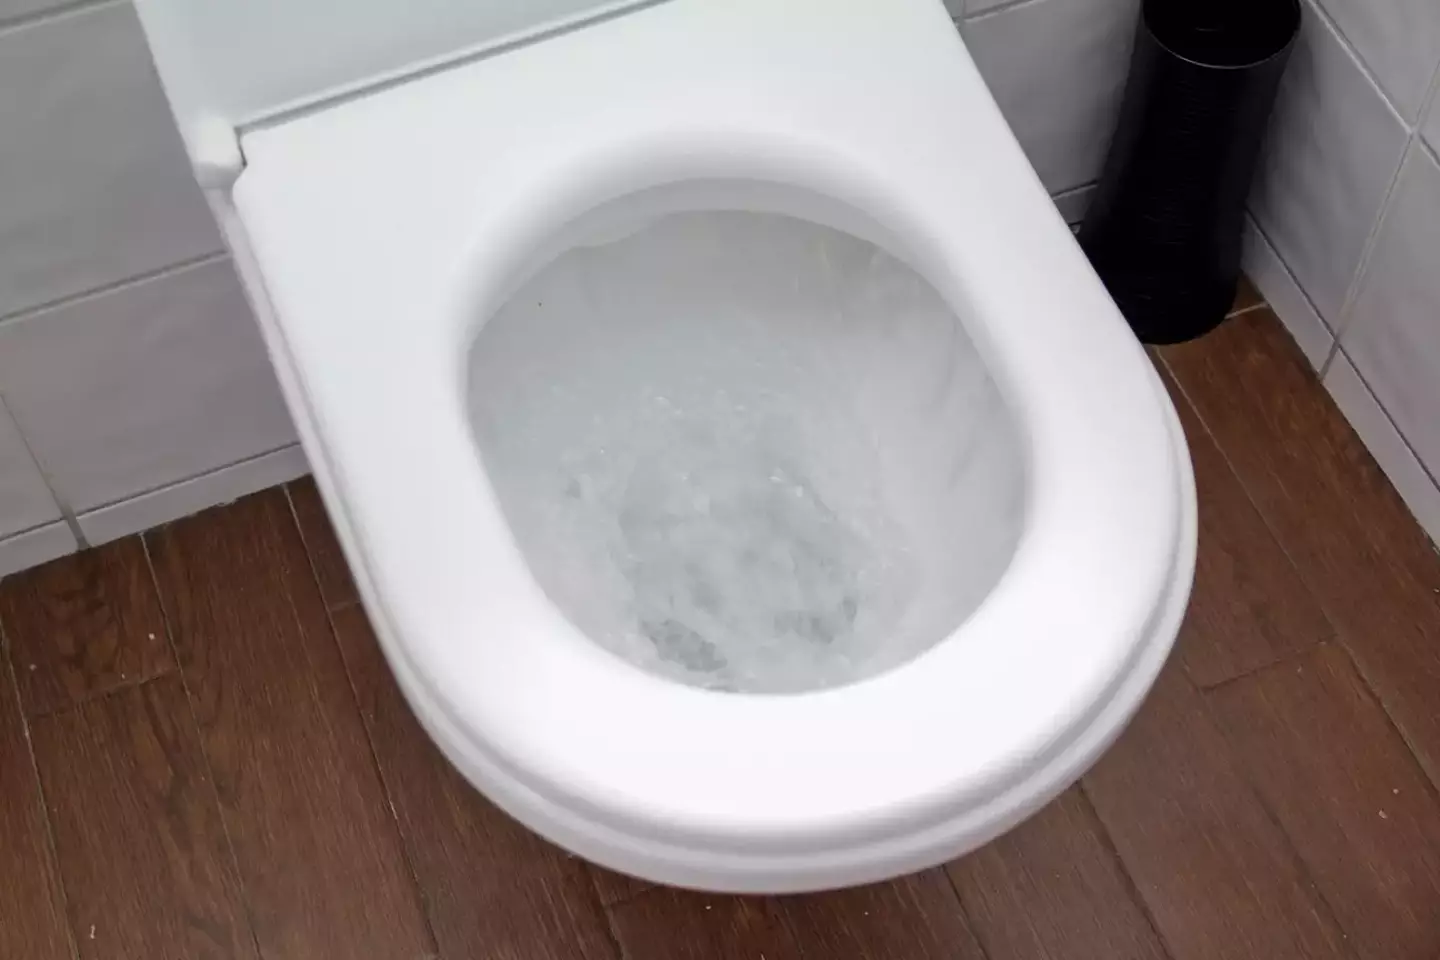 A woman cut off her husband's penis and flushed it down the toilet.